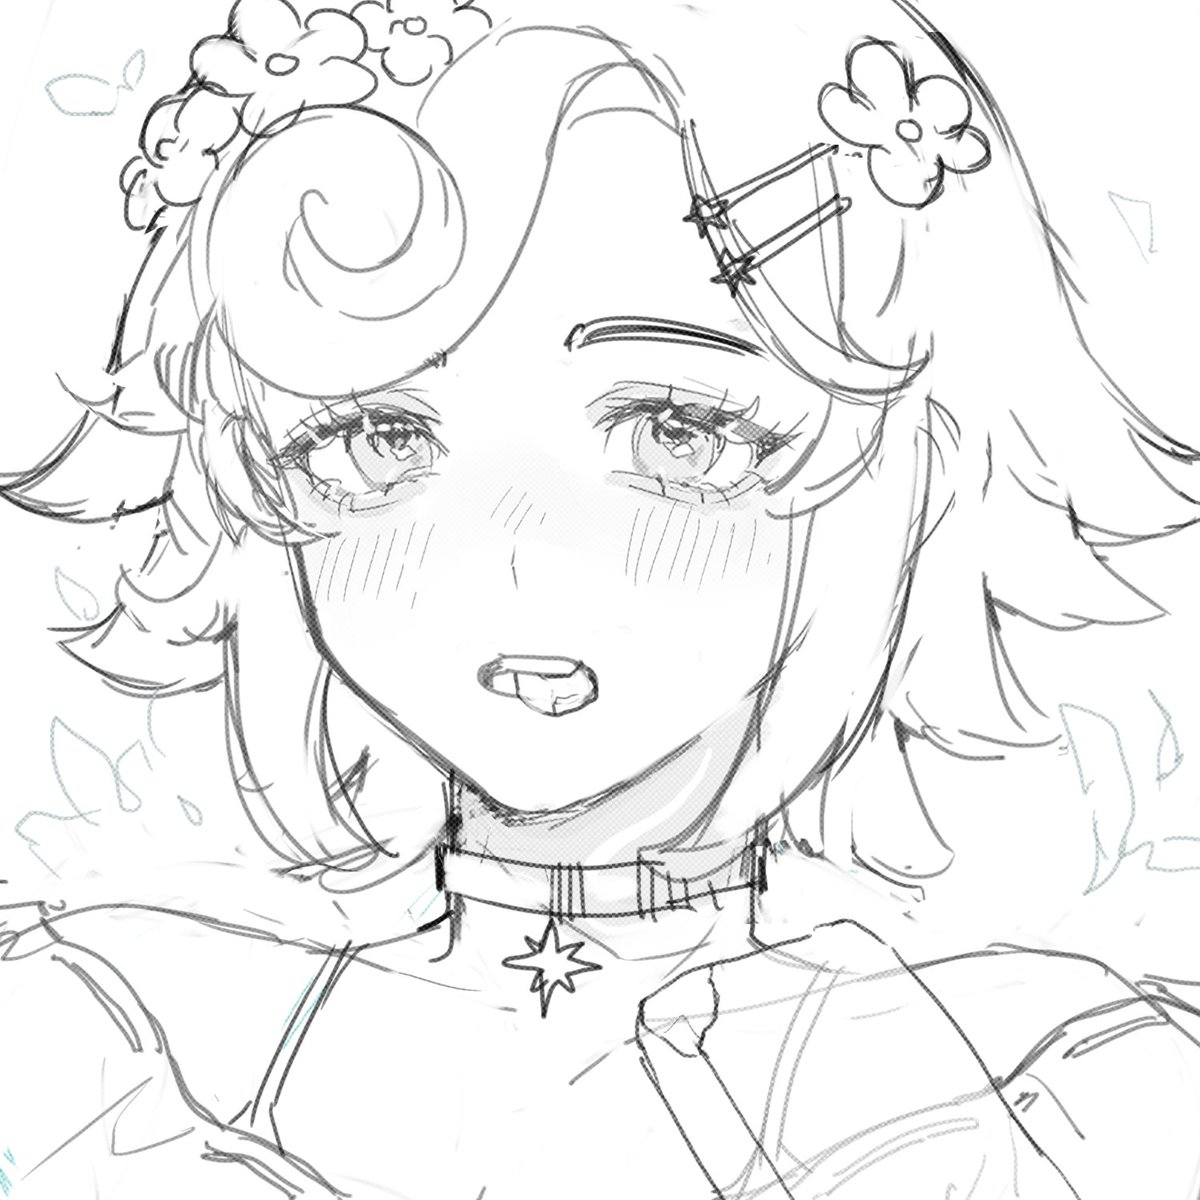 SORRY REUPLOAD, accidentally deleted lmao

sketch of OC icon asdfasgafdgdfs 